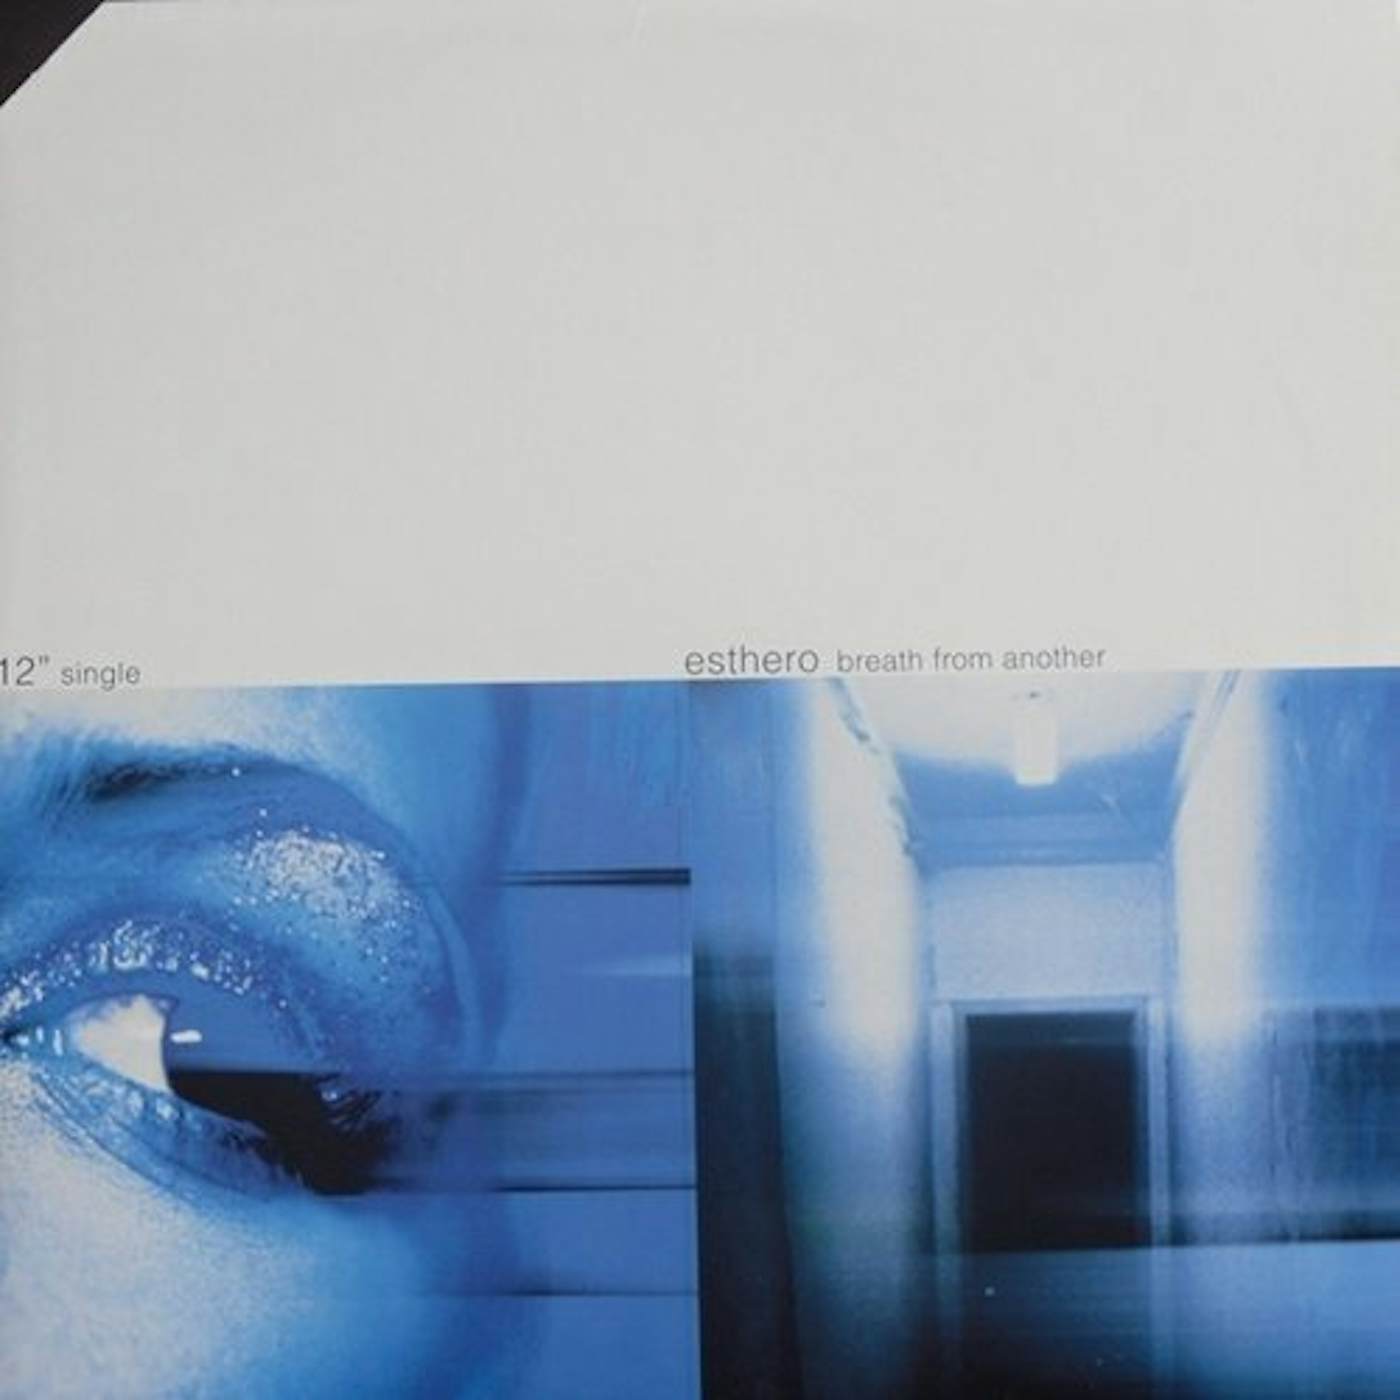 Esthero BREATH FROM ANOTHER (X5) Vinyl Record